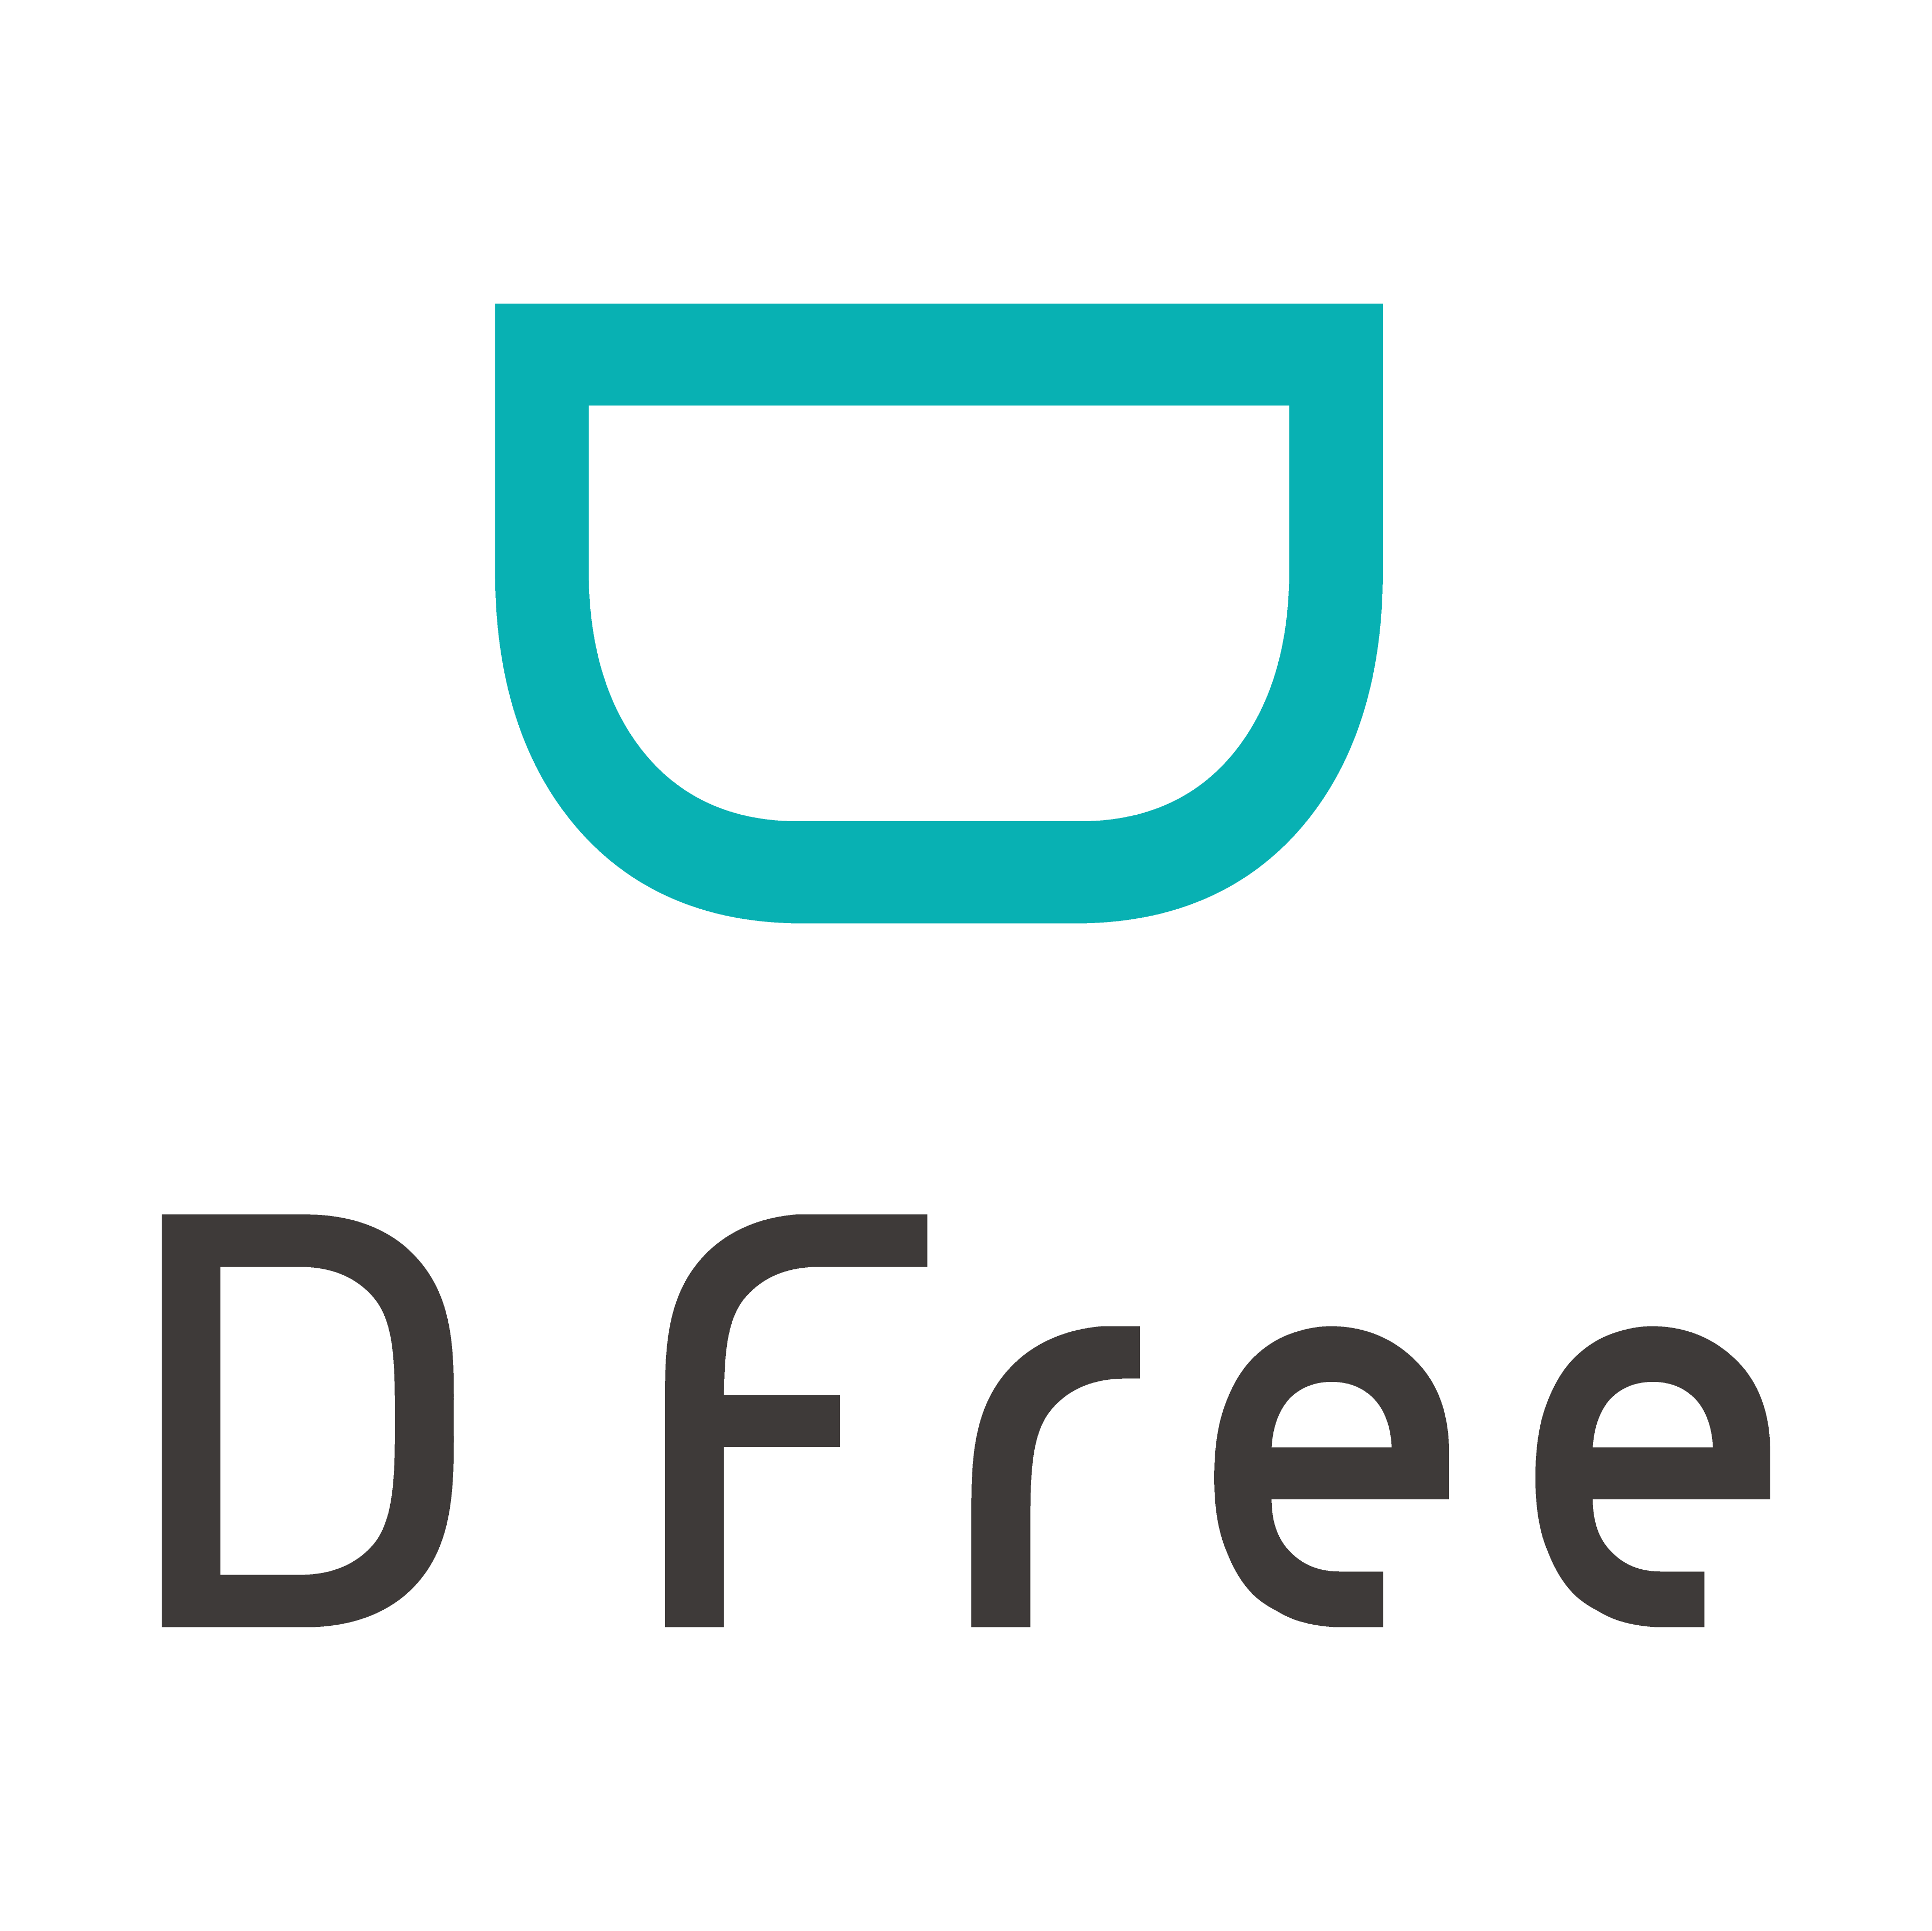 DFree logo. DFree stands for “diaper-free.”